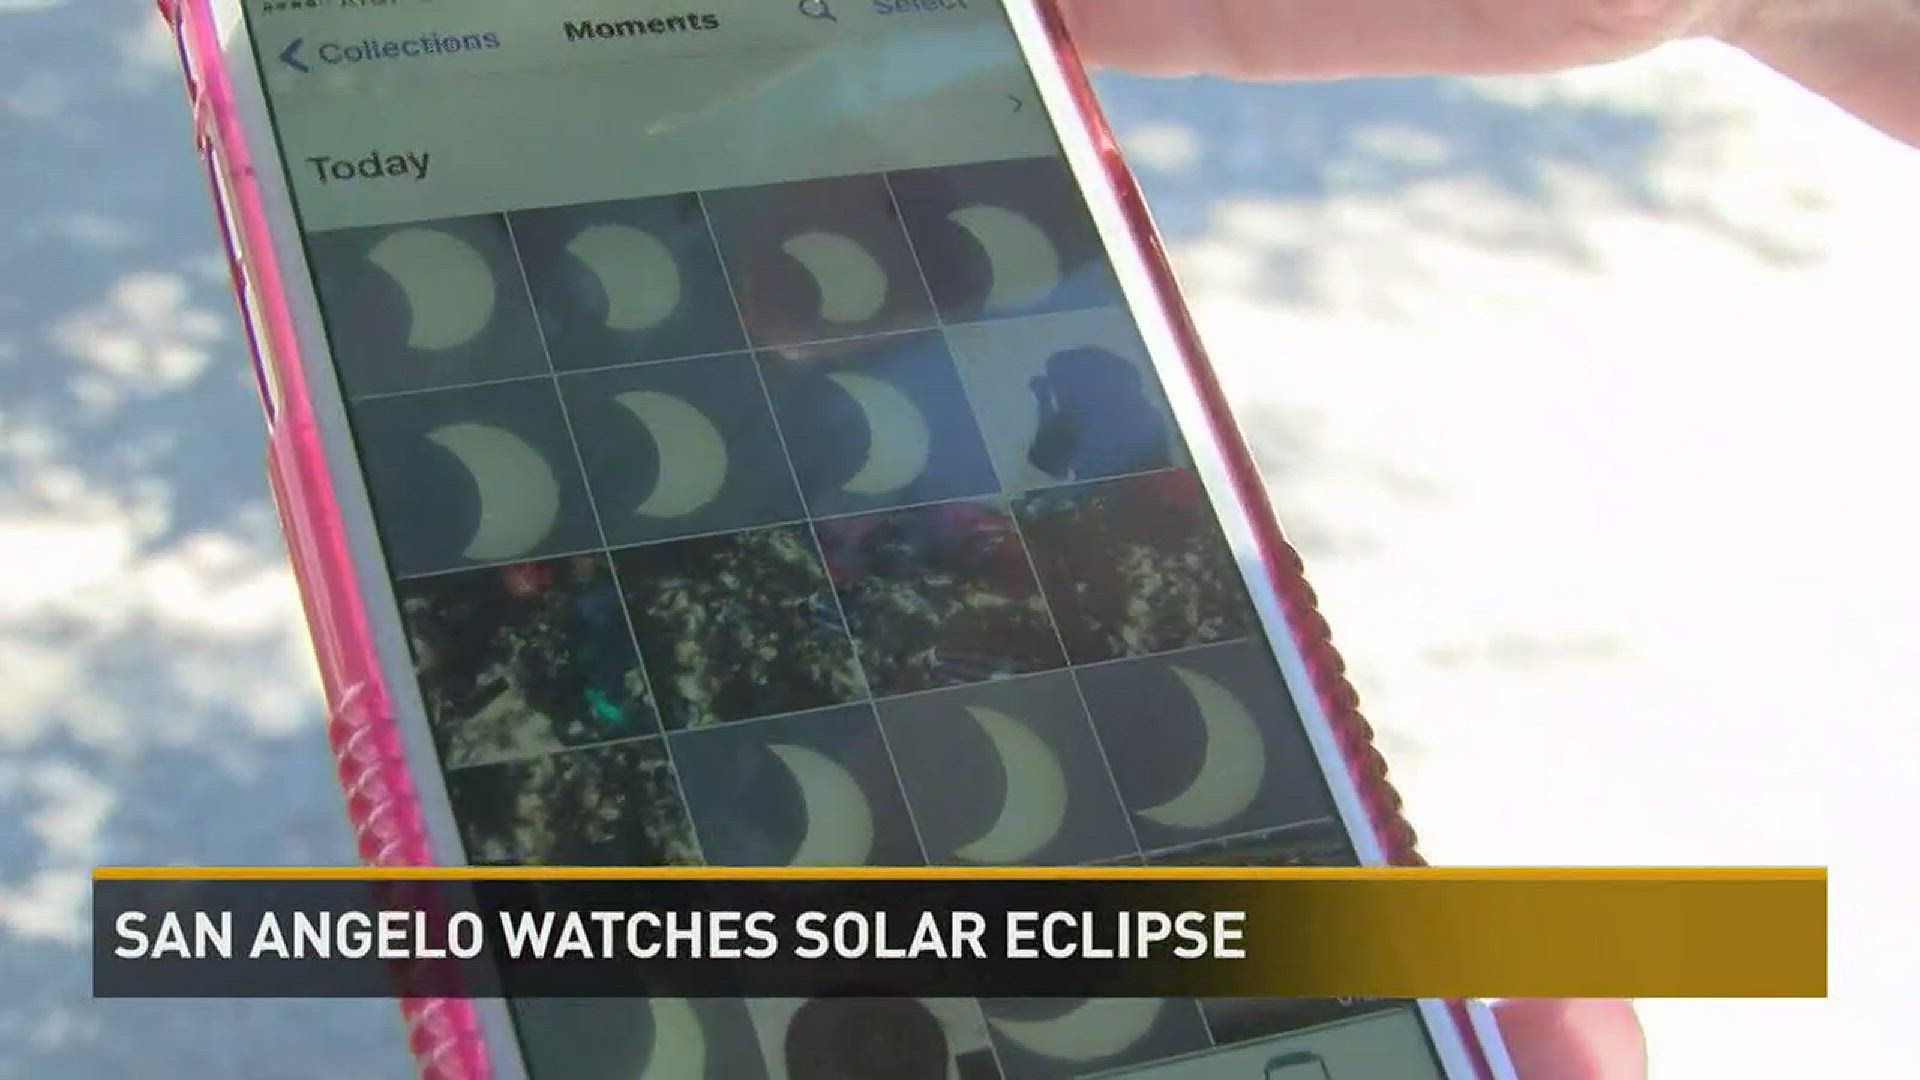 For the first time in 99 years a solar eclipse was seen coast to coast in America. Hundreds in San Angelo gathered to watch the sky as the 2017 great eclipse took center stage.